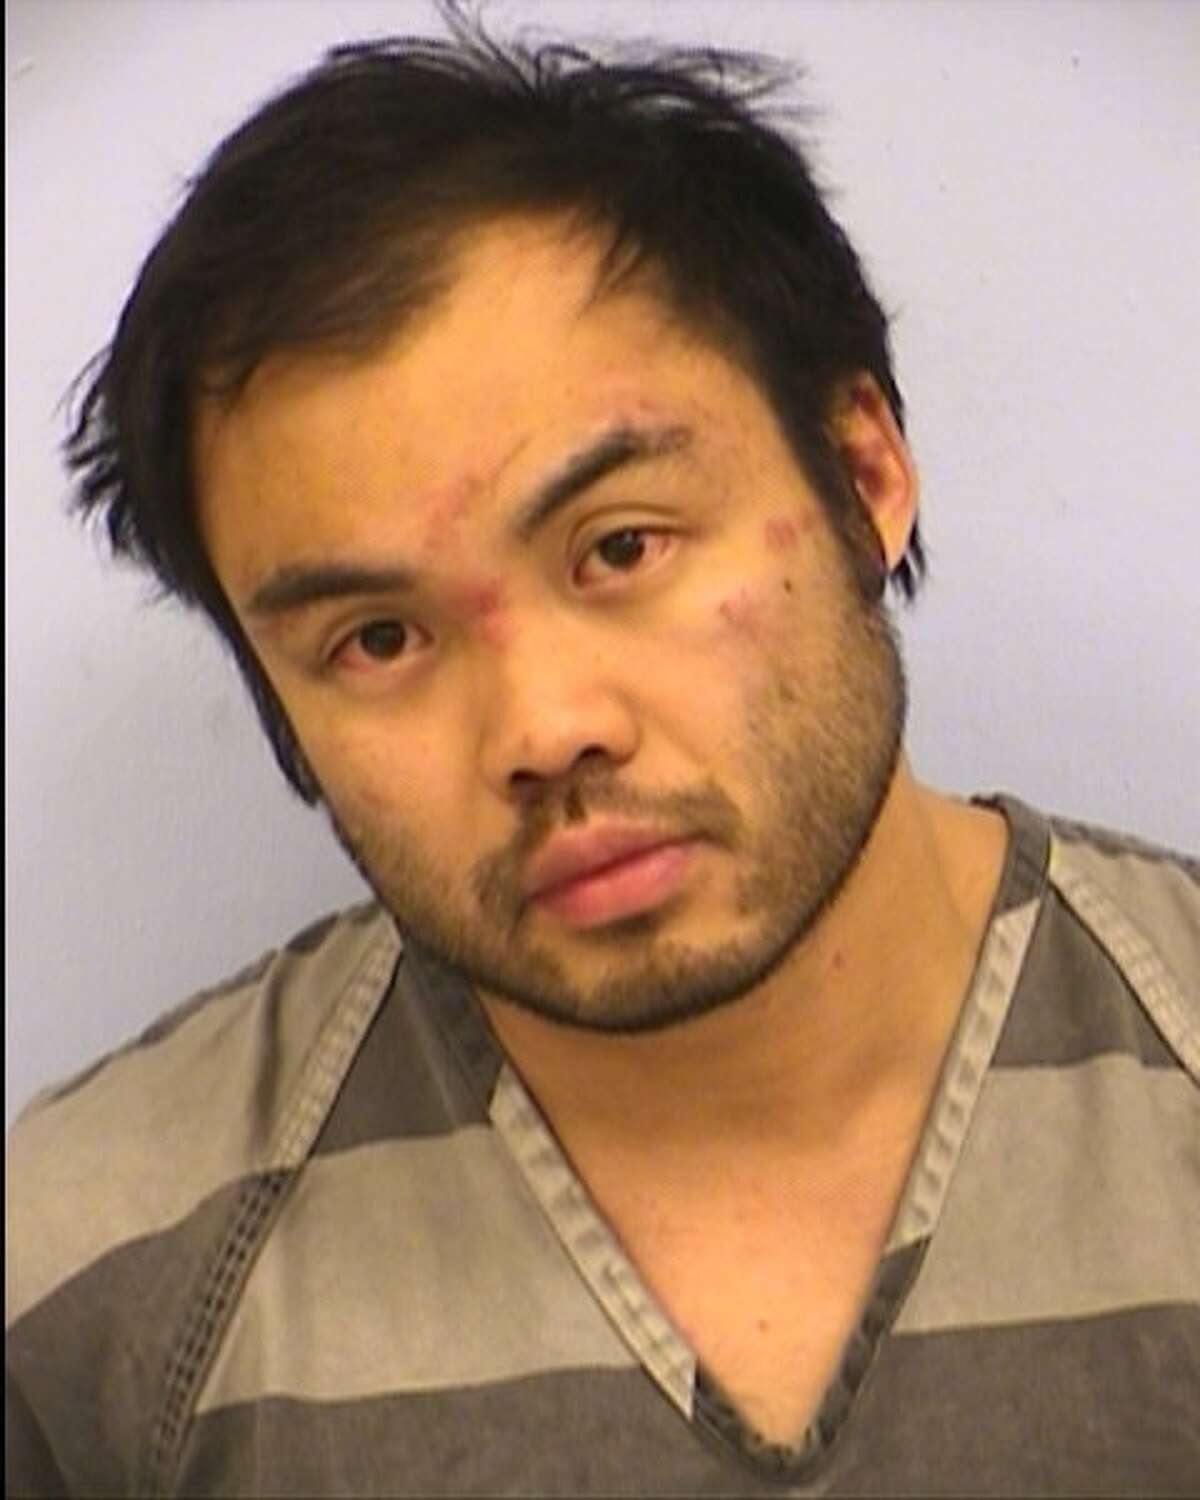 Paul Qui, an award-winning Austin chef and restaurateur who owns the downtown Austin restaurant Qui, was arrested and charged with assault causing bodily injury to a family member and unlawful restraint after allegedly assaulting his girlfriend on March 19, 2016.